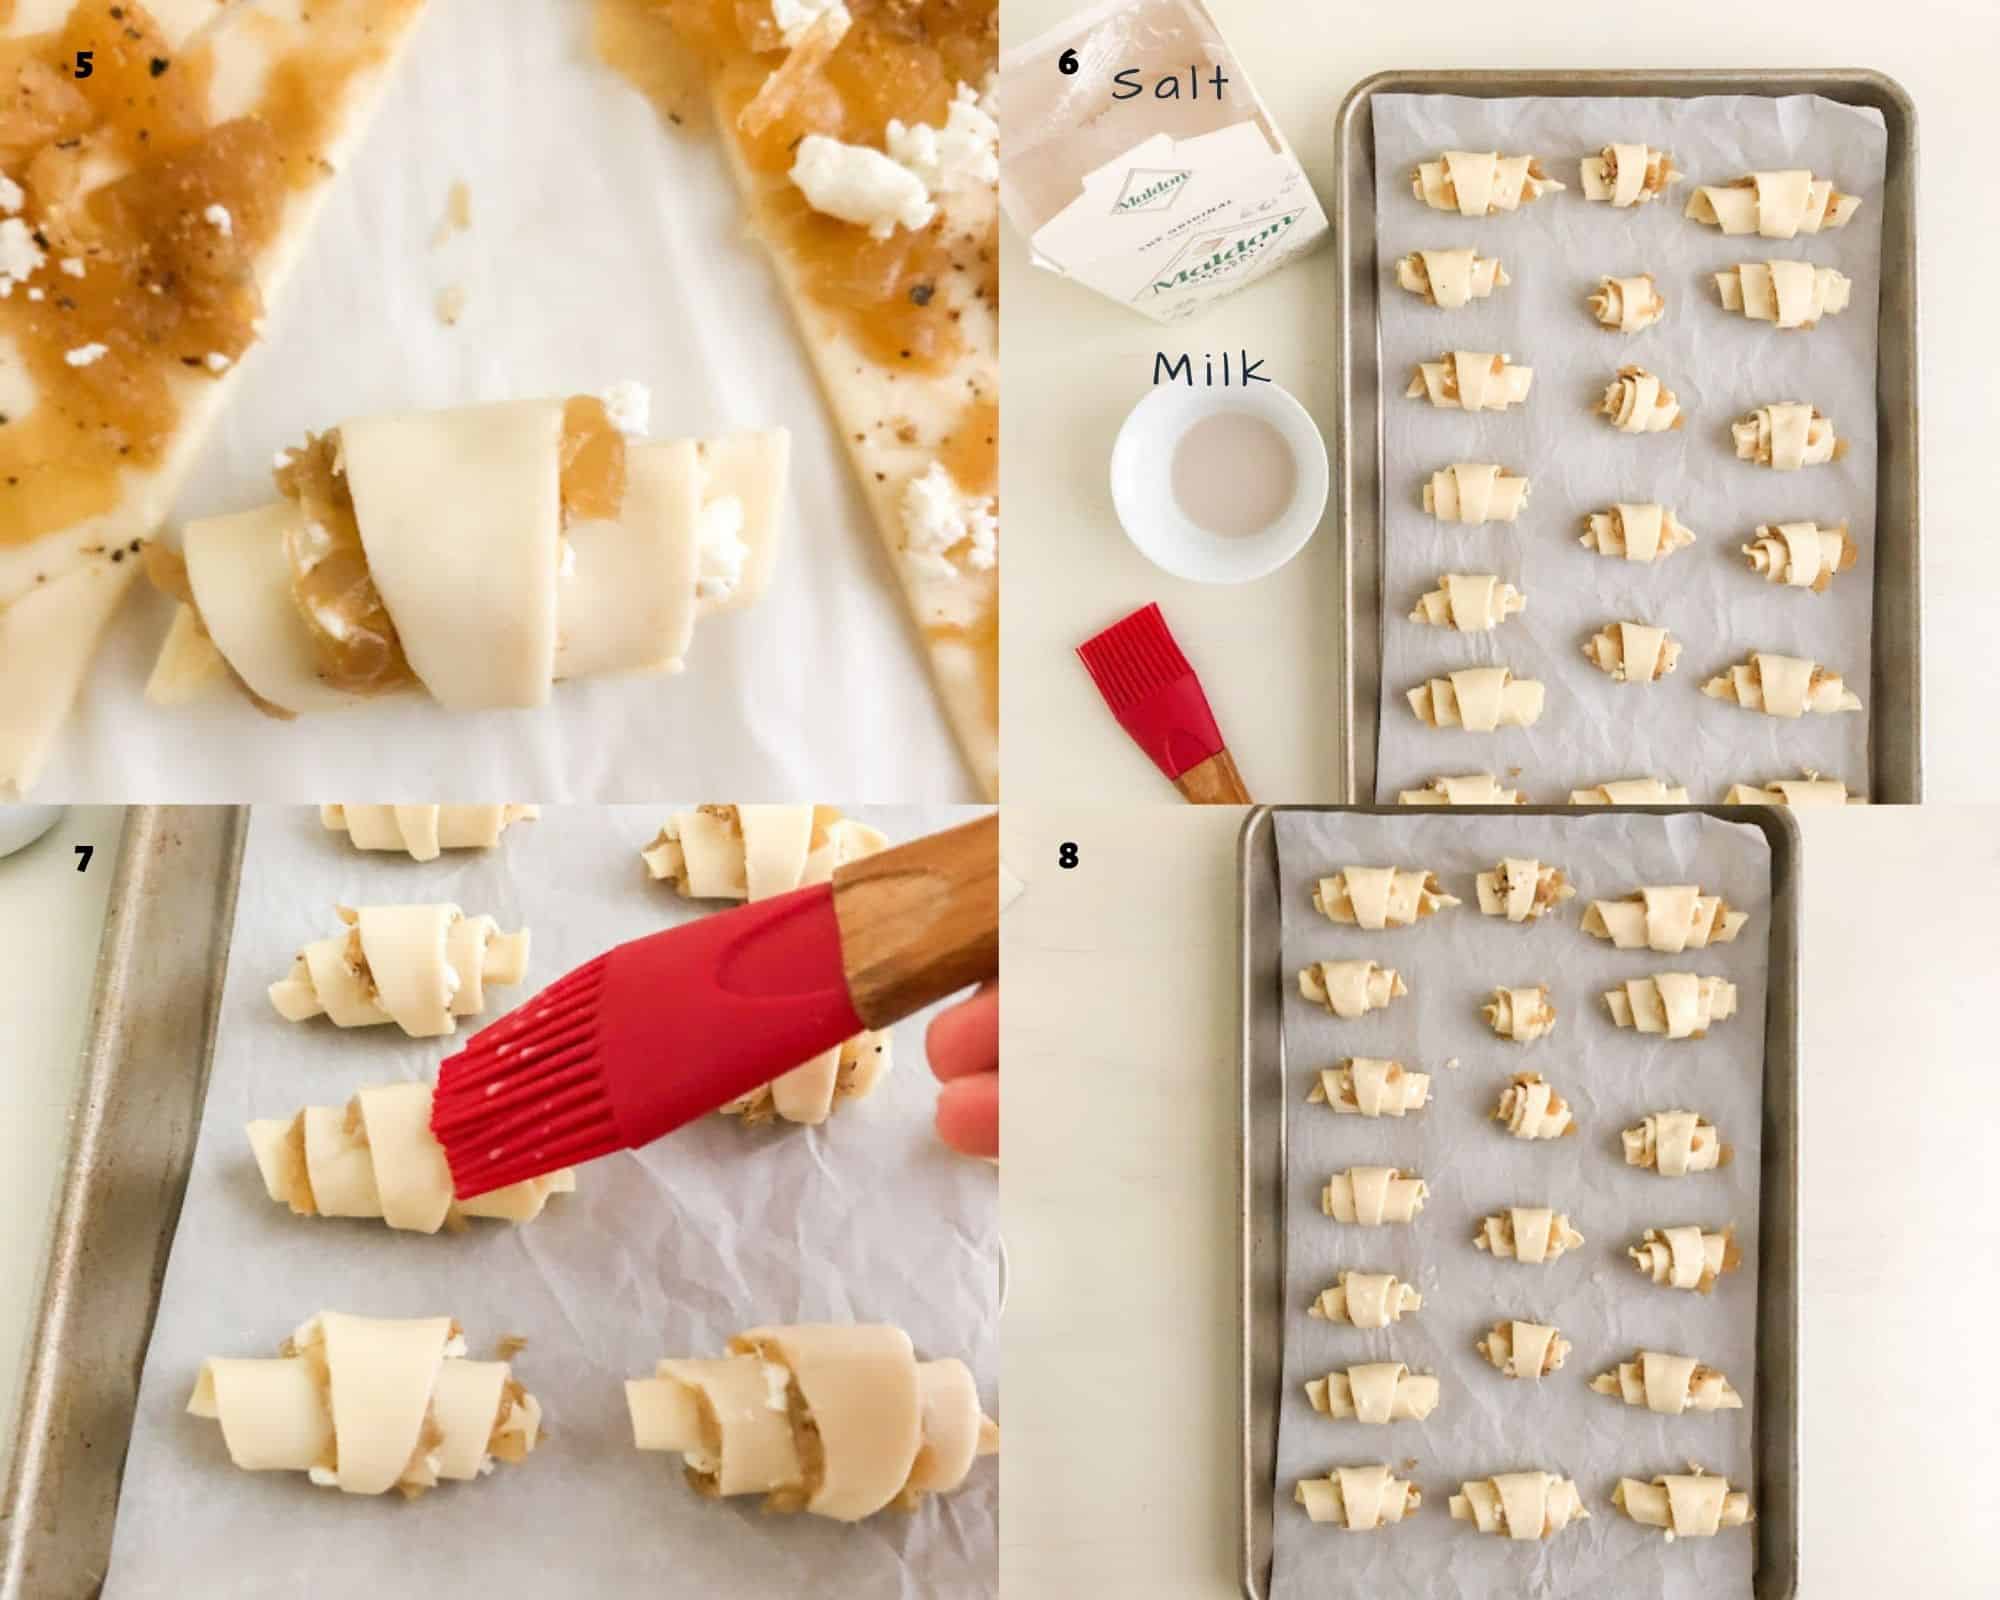 Process shots for rolling and brushing rugelach with milk on baking sheet.